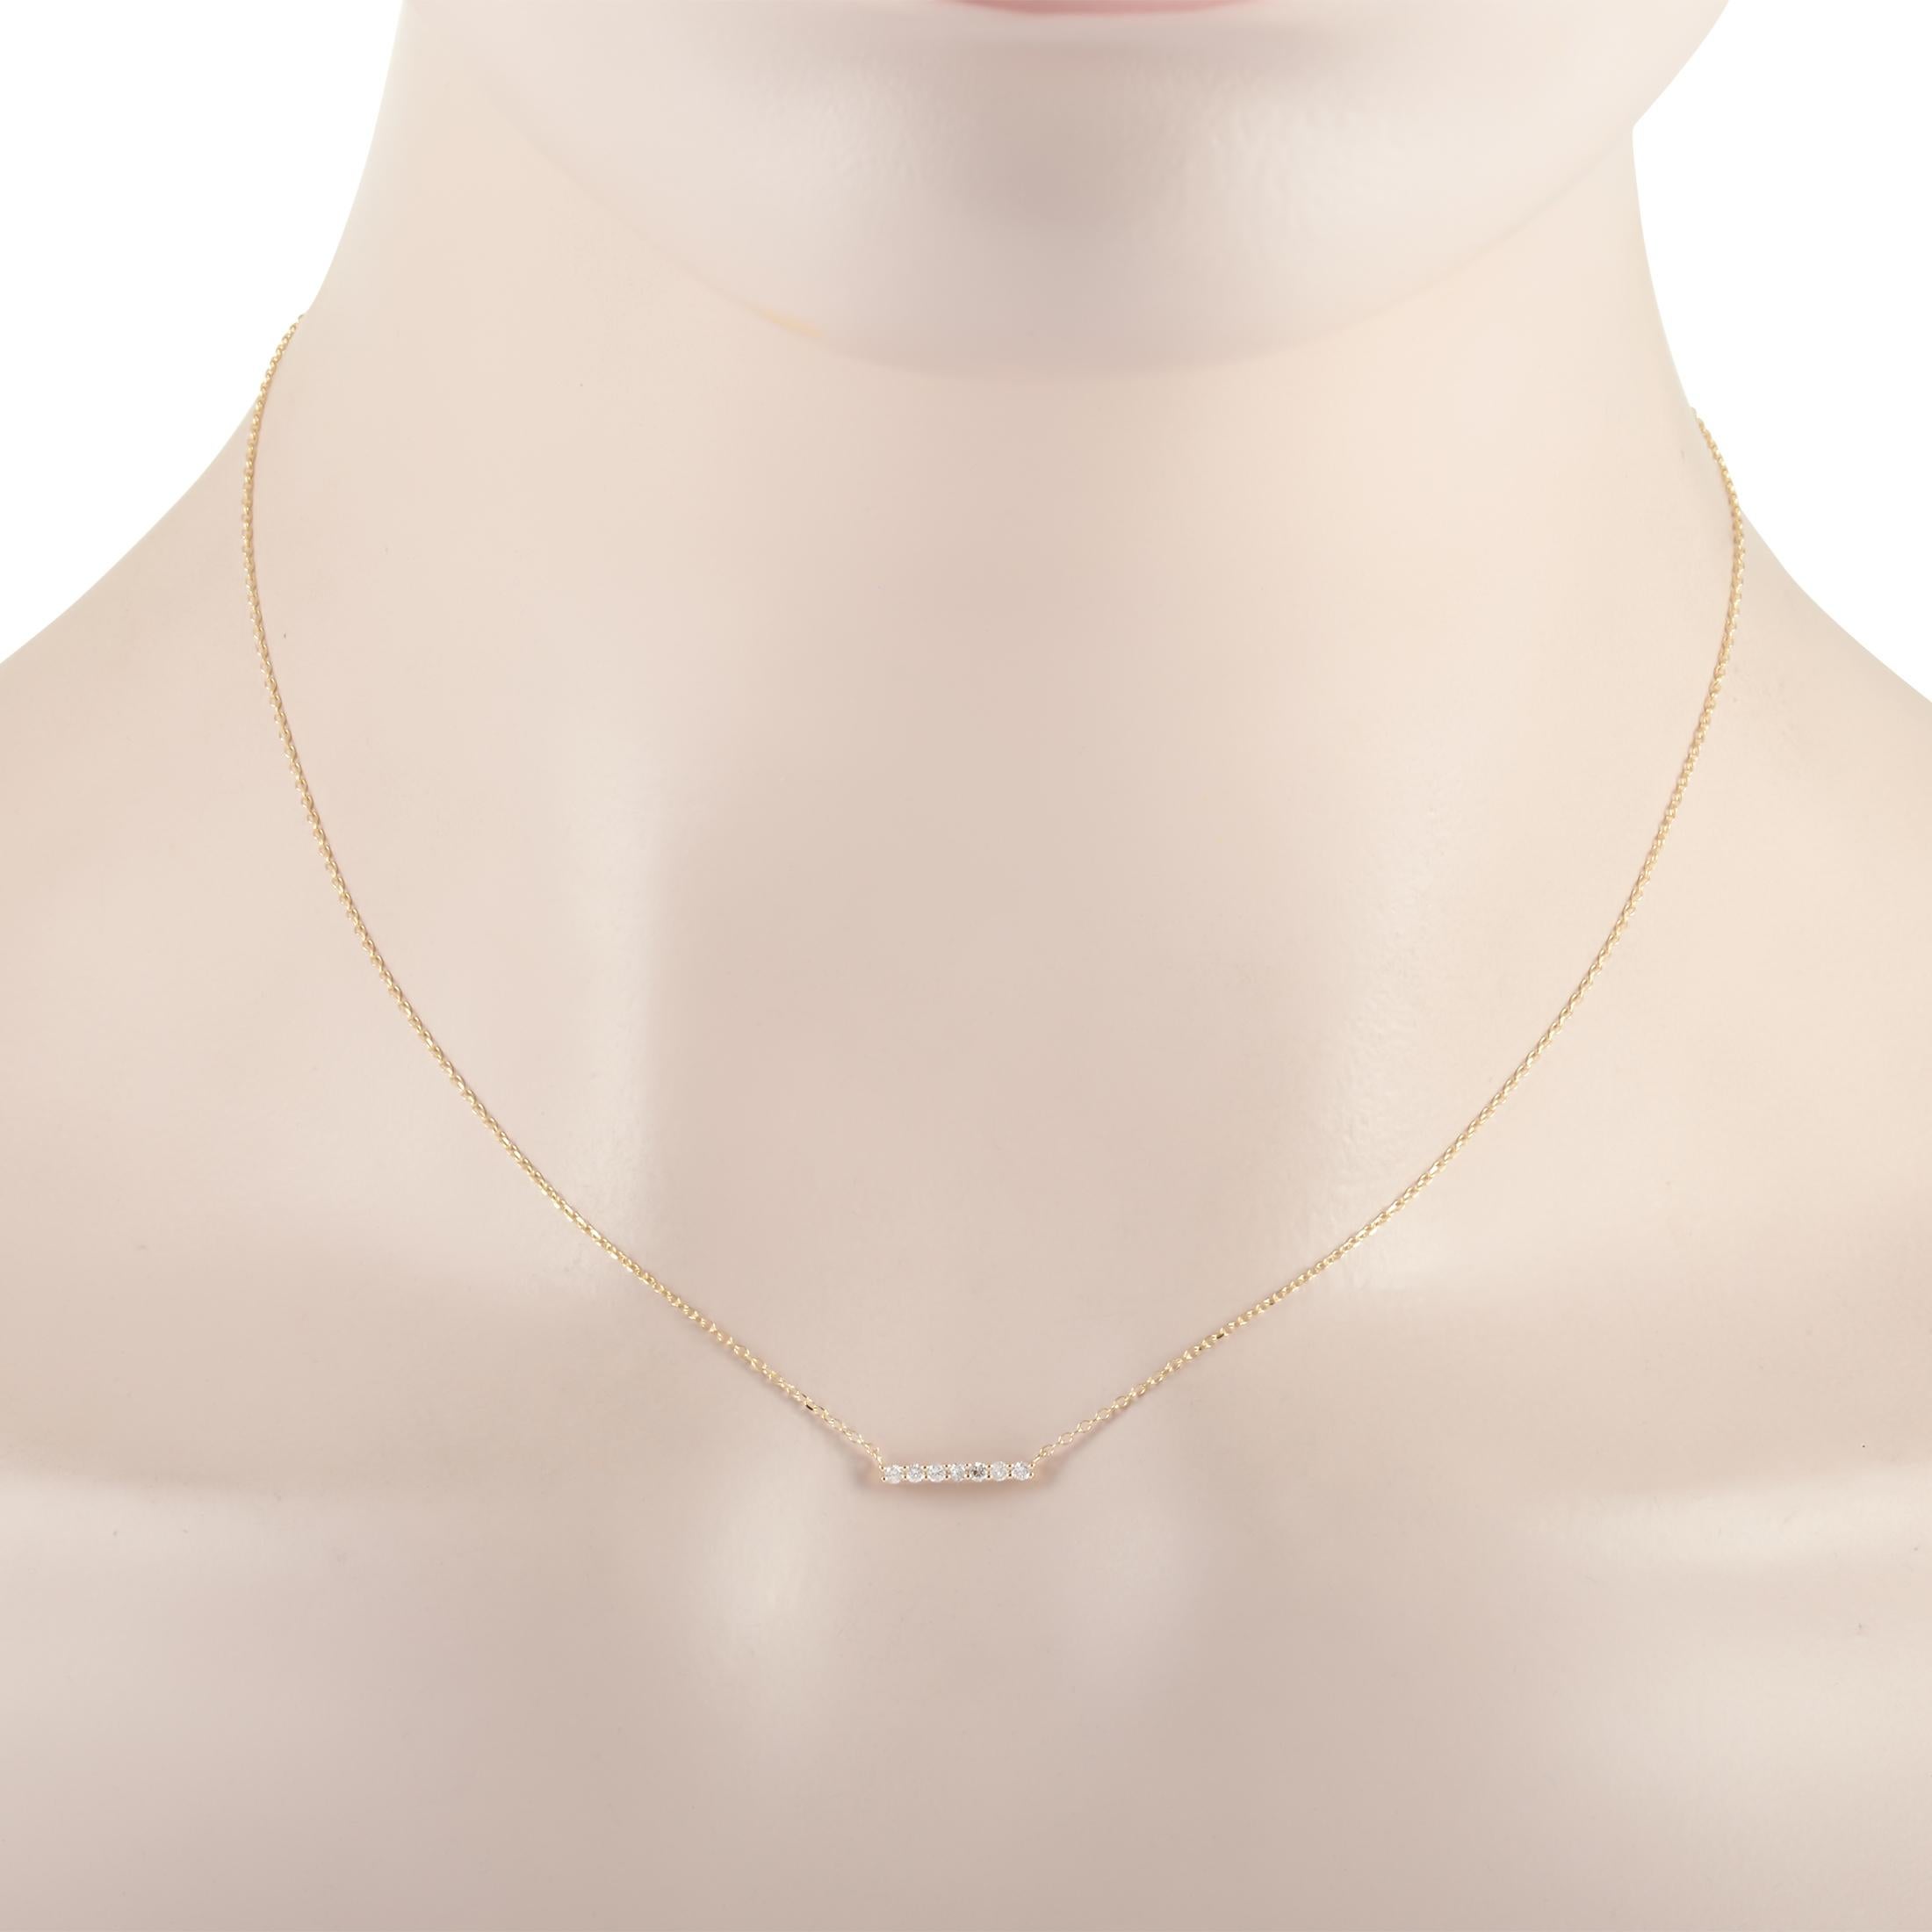 This LB Exclusive necklace is made of 14K yellow gold and embellished with diamonds that amount to 0.10 carats. The necklace weighs 1.3 grams and boasts a 15” chain and a pendant that measures 0.10” in length and 0.44” in width.
 
 Offered in